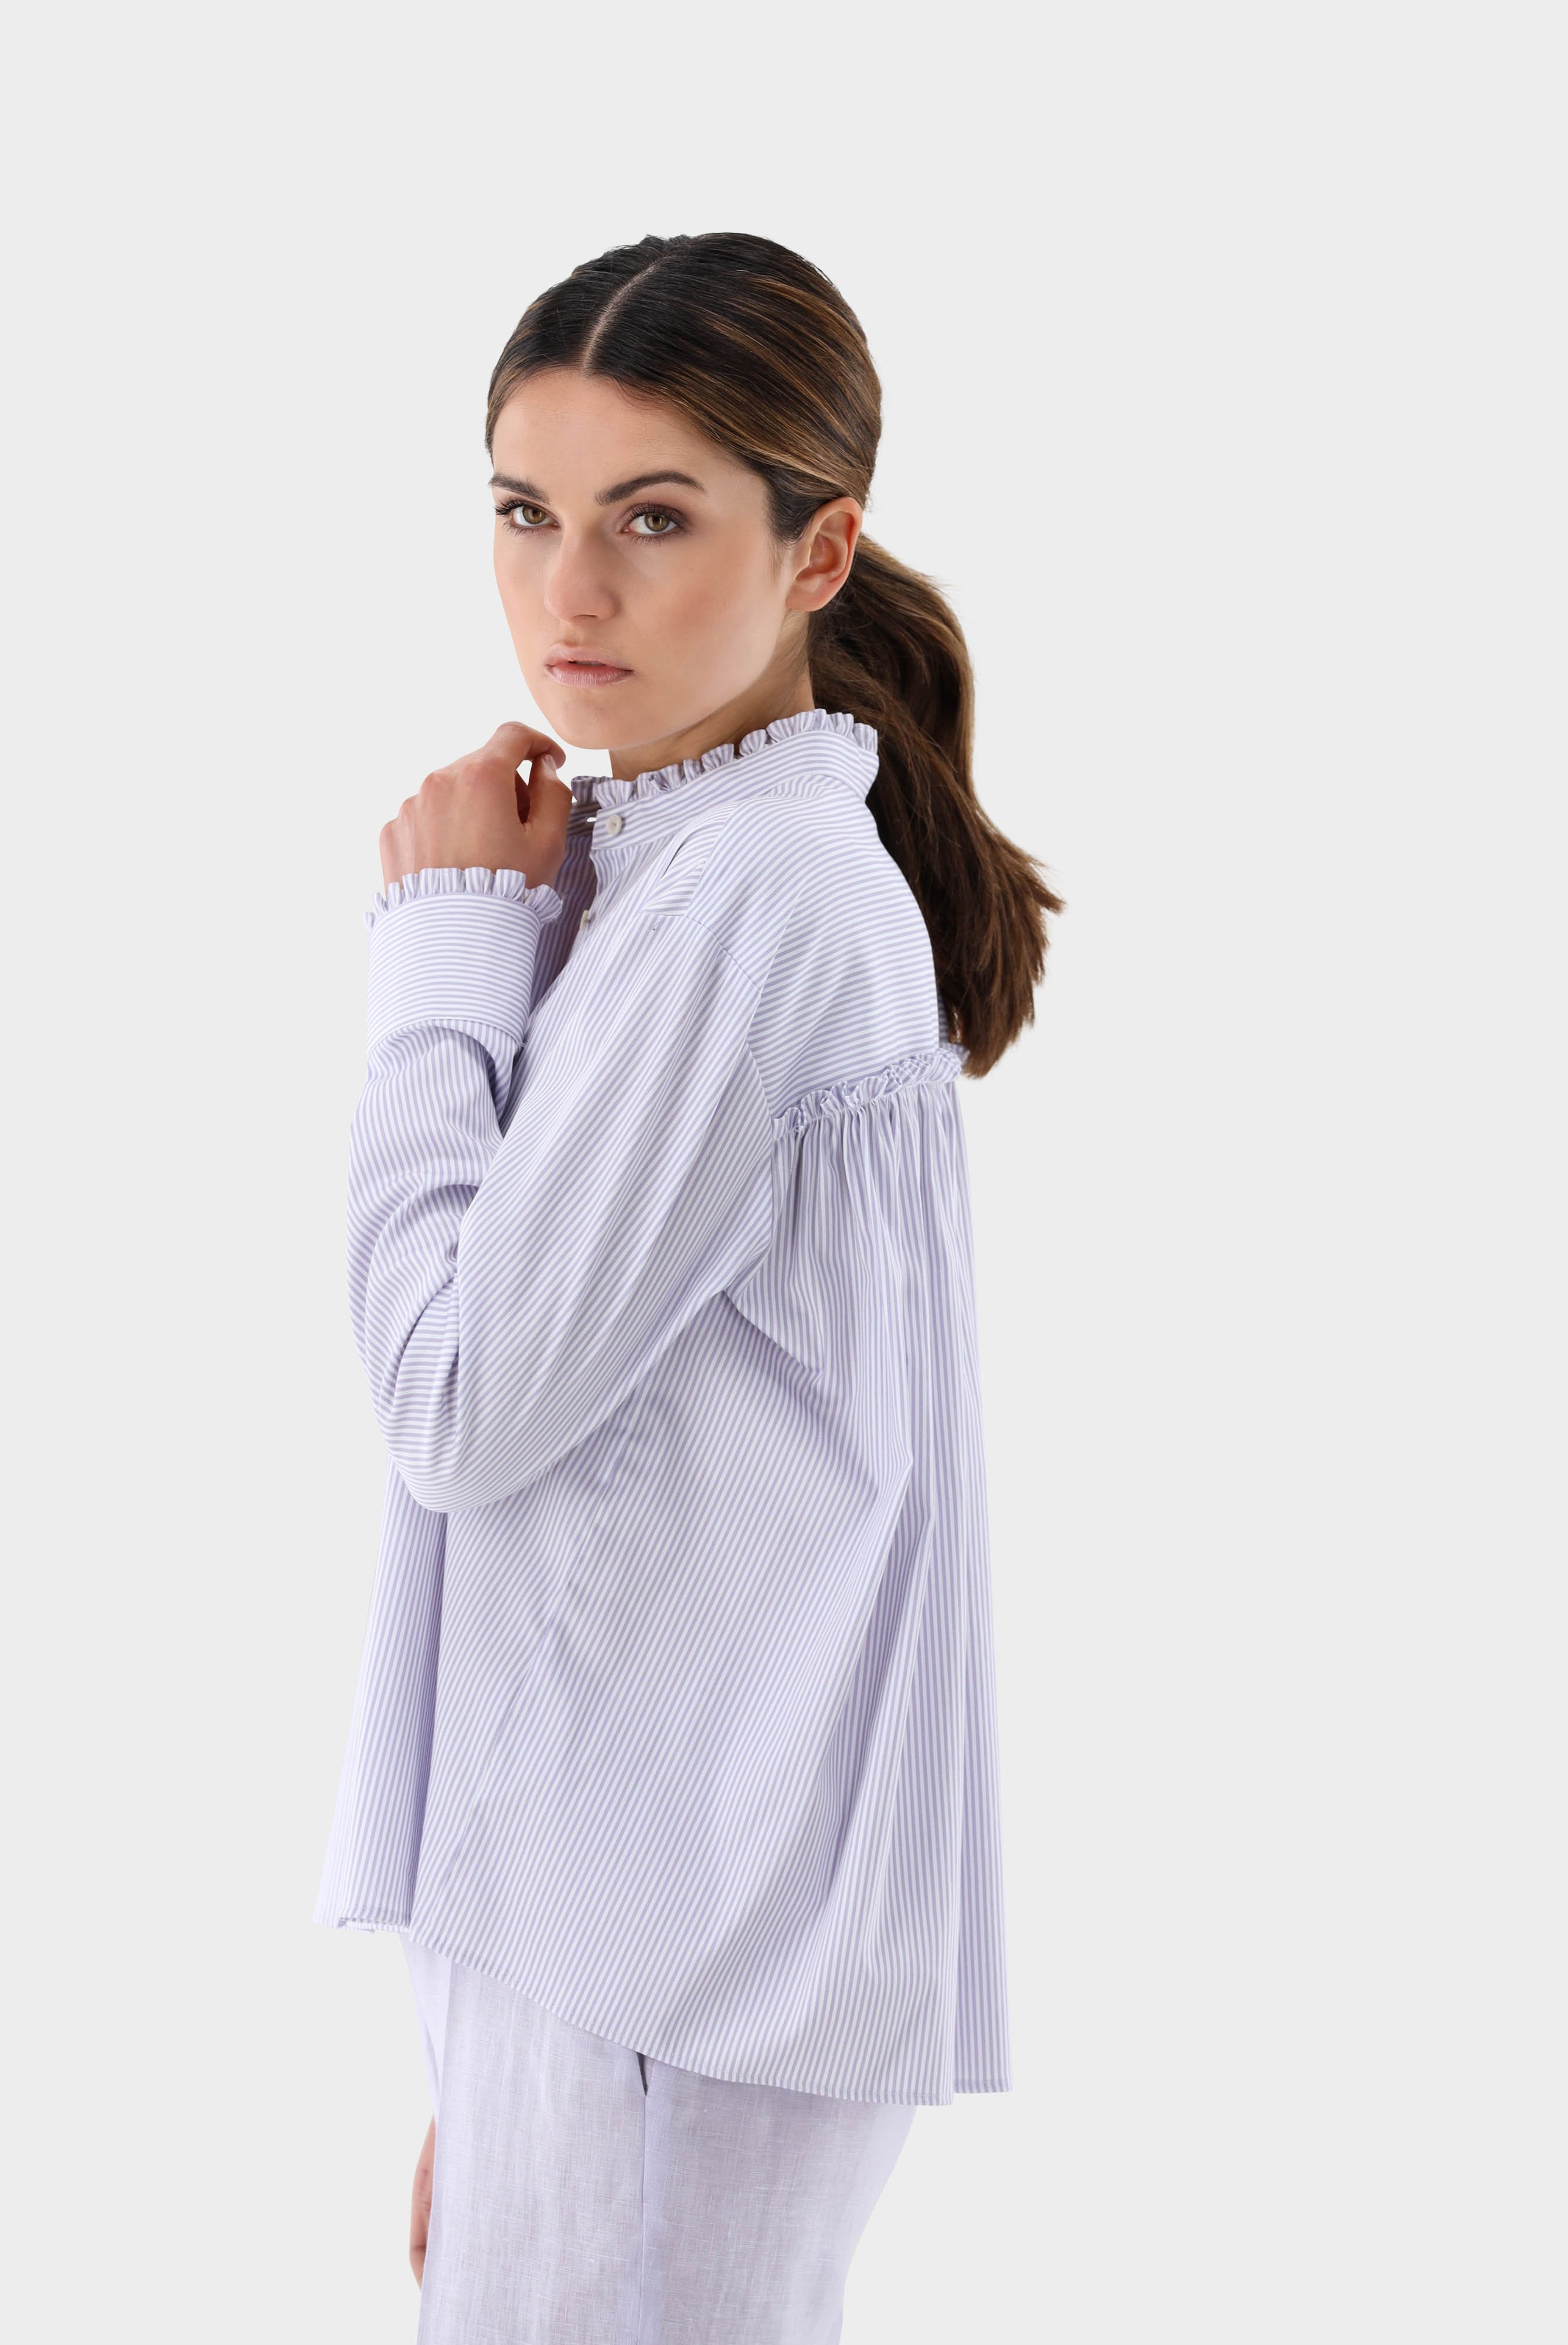 Standup Collar Blouse with Ruffles and Stripes